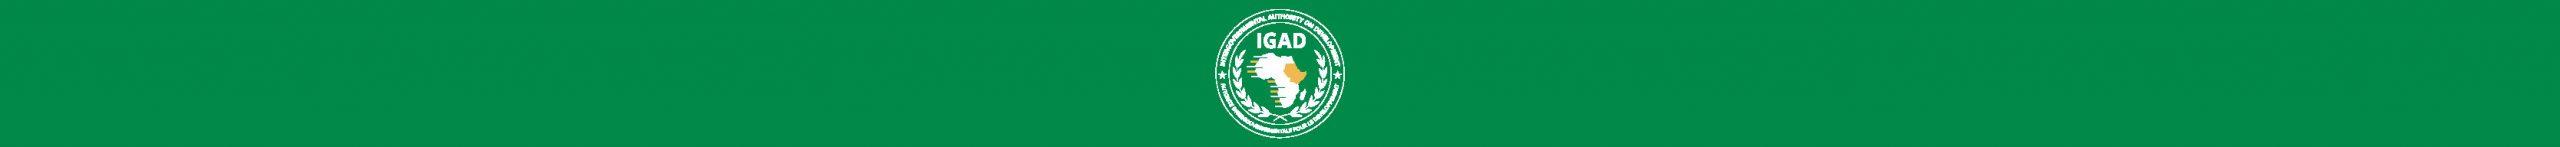 IGAD /ICPALD Conducted the 3rd Regional Fodder and Range Platform in IGAD Member States to Enhance Feed Security